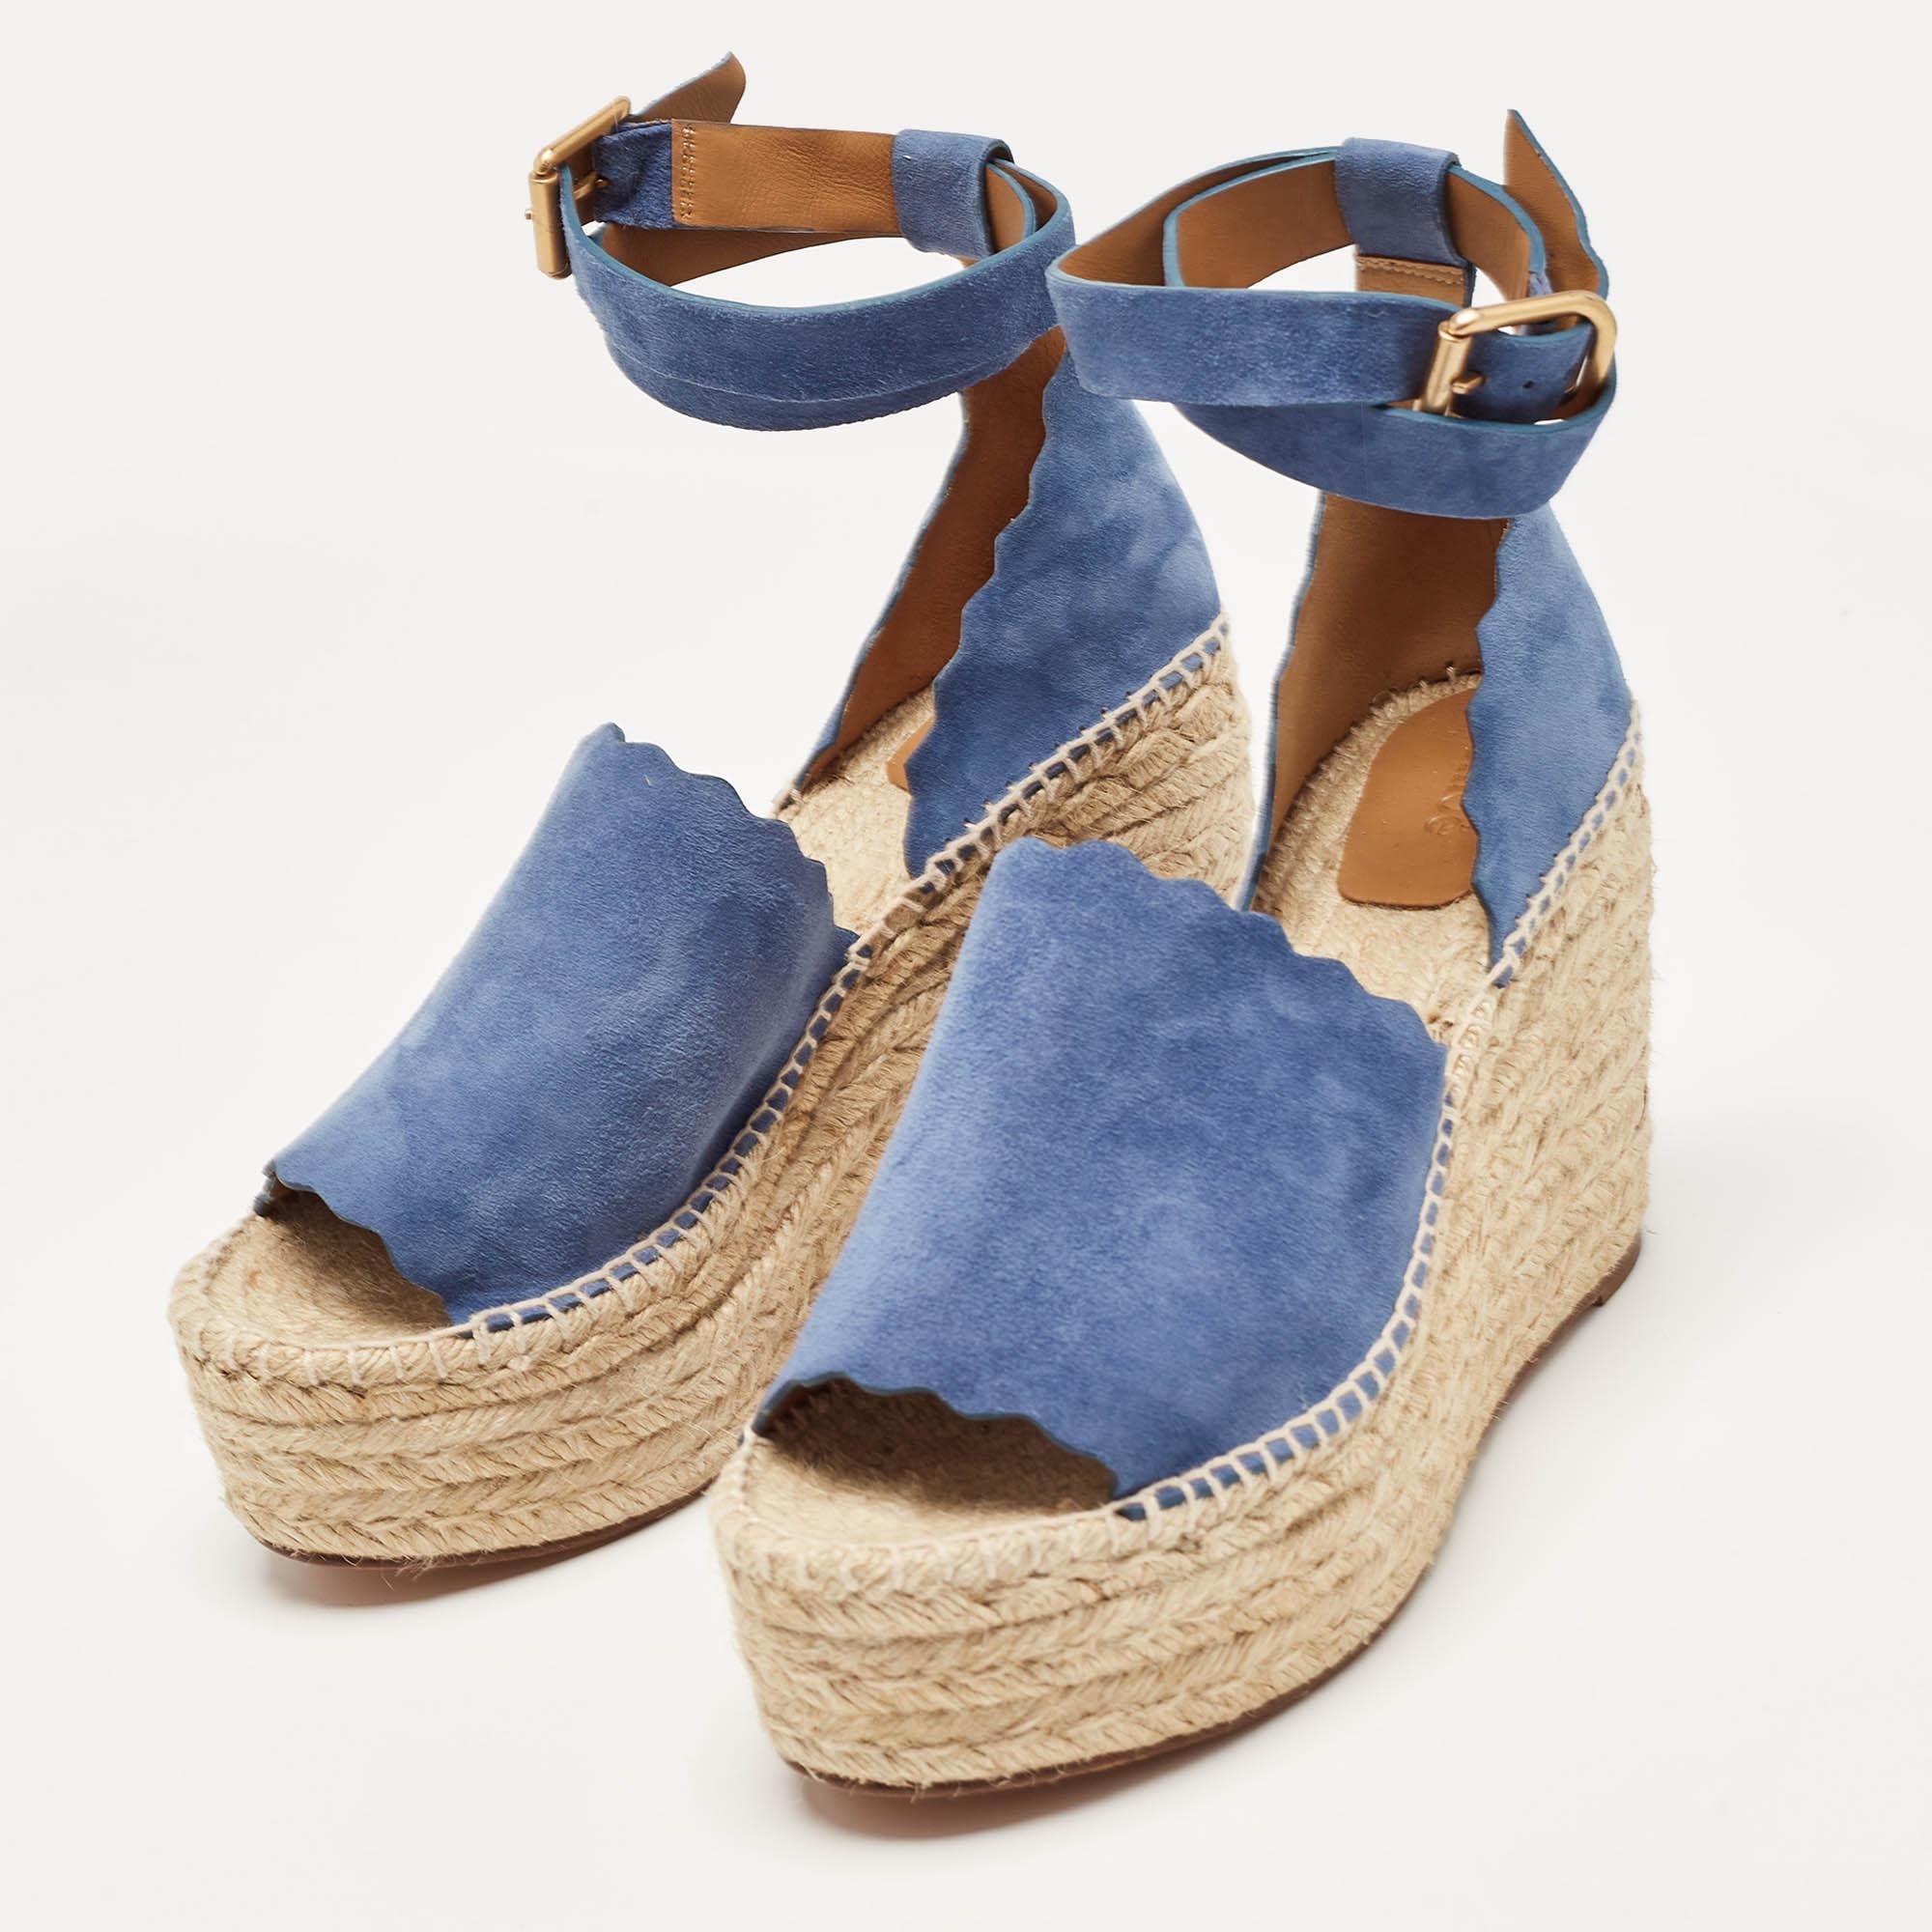 Whether you're into high style, comfort, or both, these lovely Chloe Lauren wedges will never disappoint. They feature a chic silhouette and an eye-pleasing hue. Make this pair yours today!

